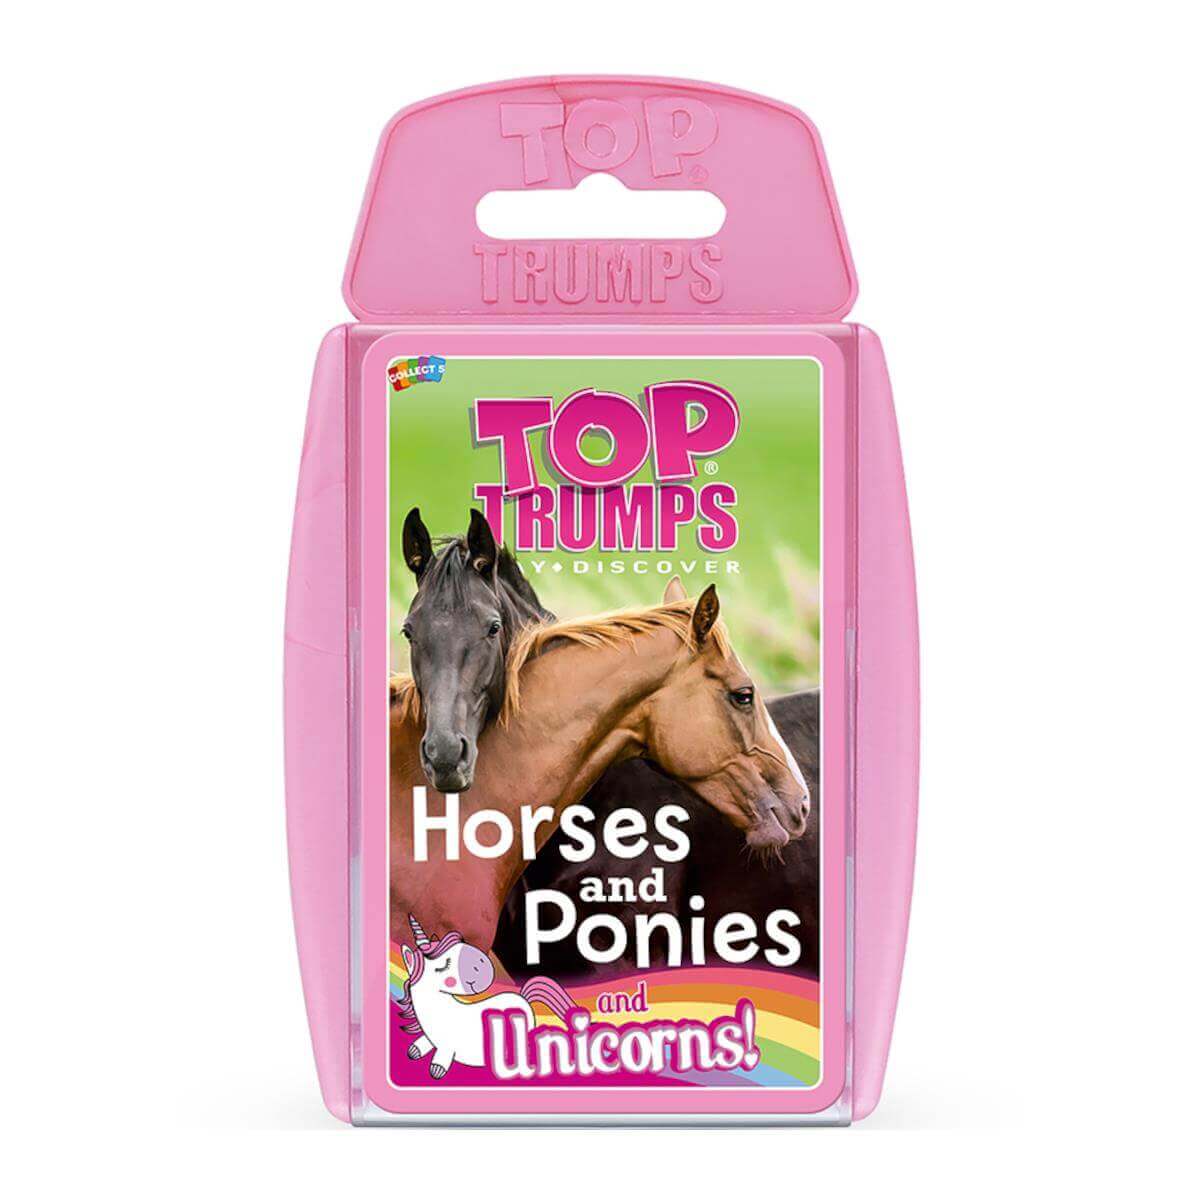 Top Trumps: Horses and Ponies and Unicorn